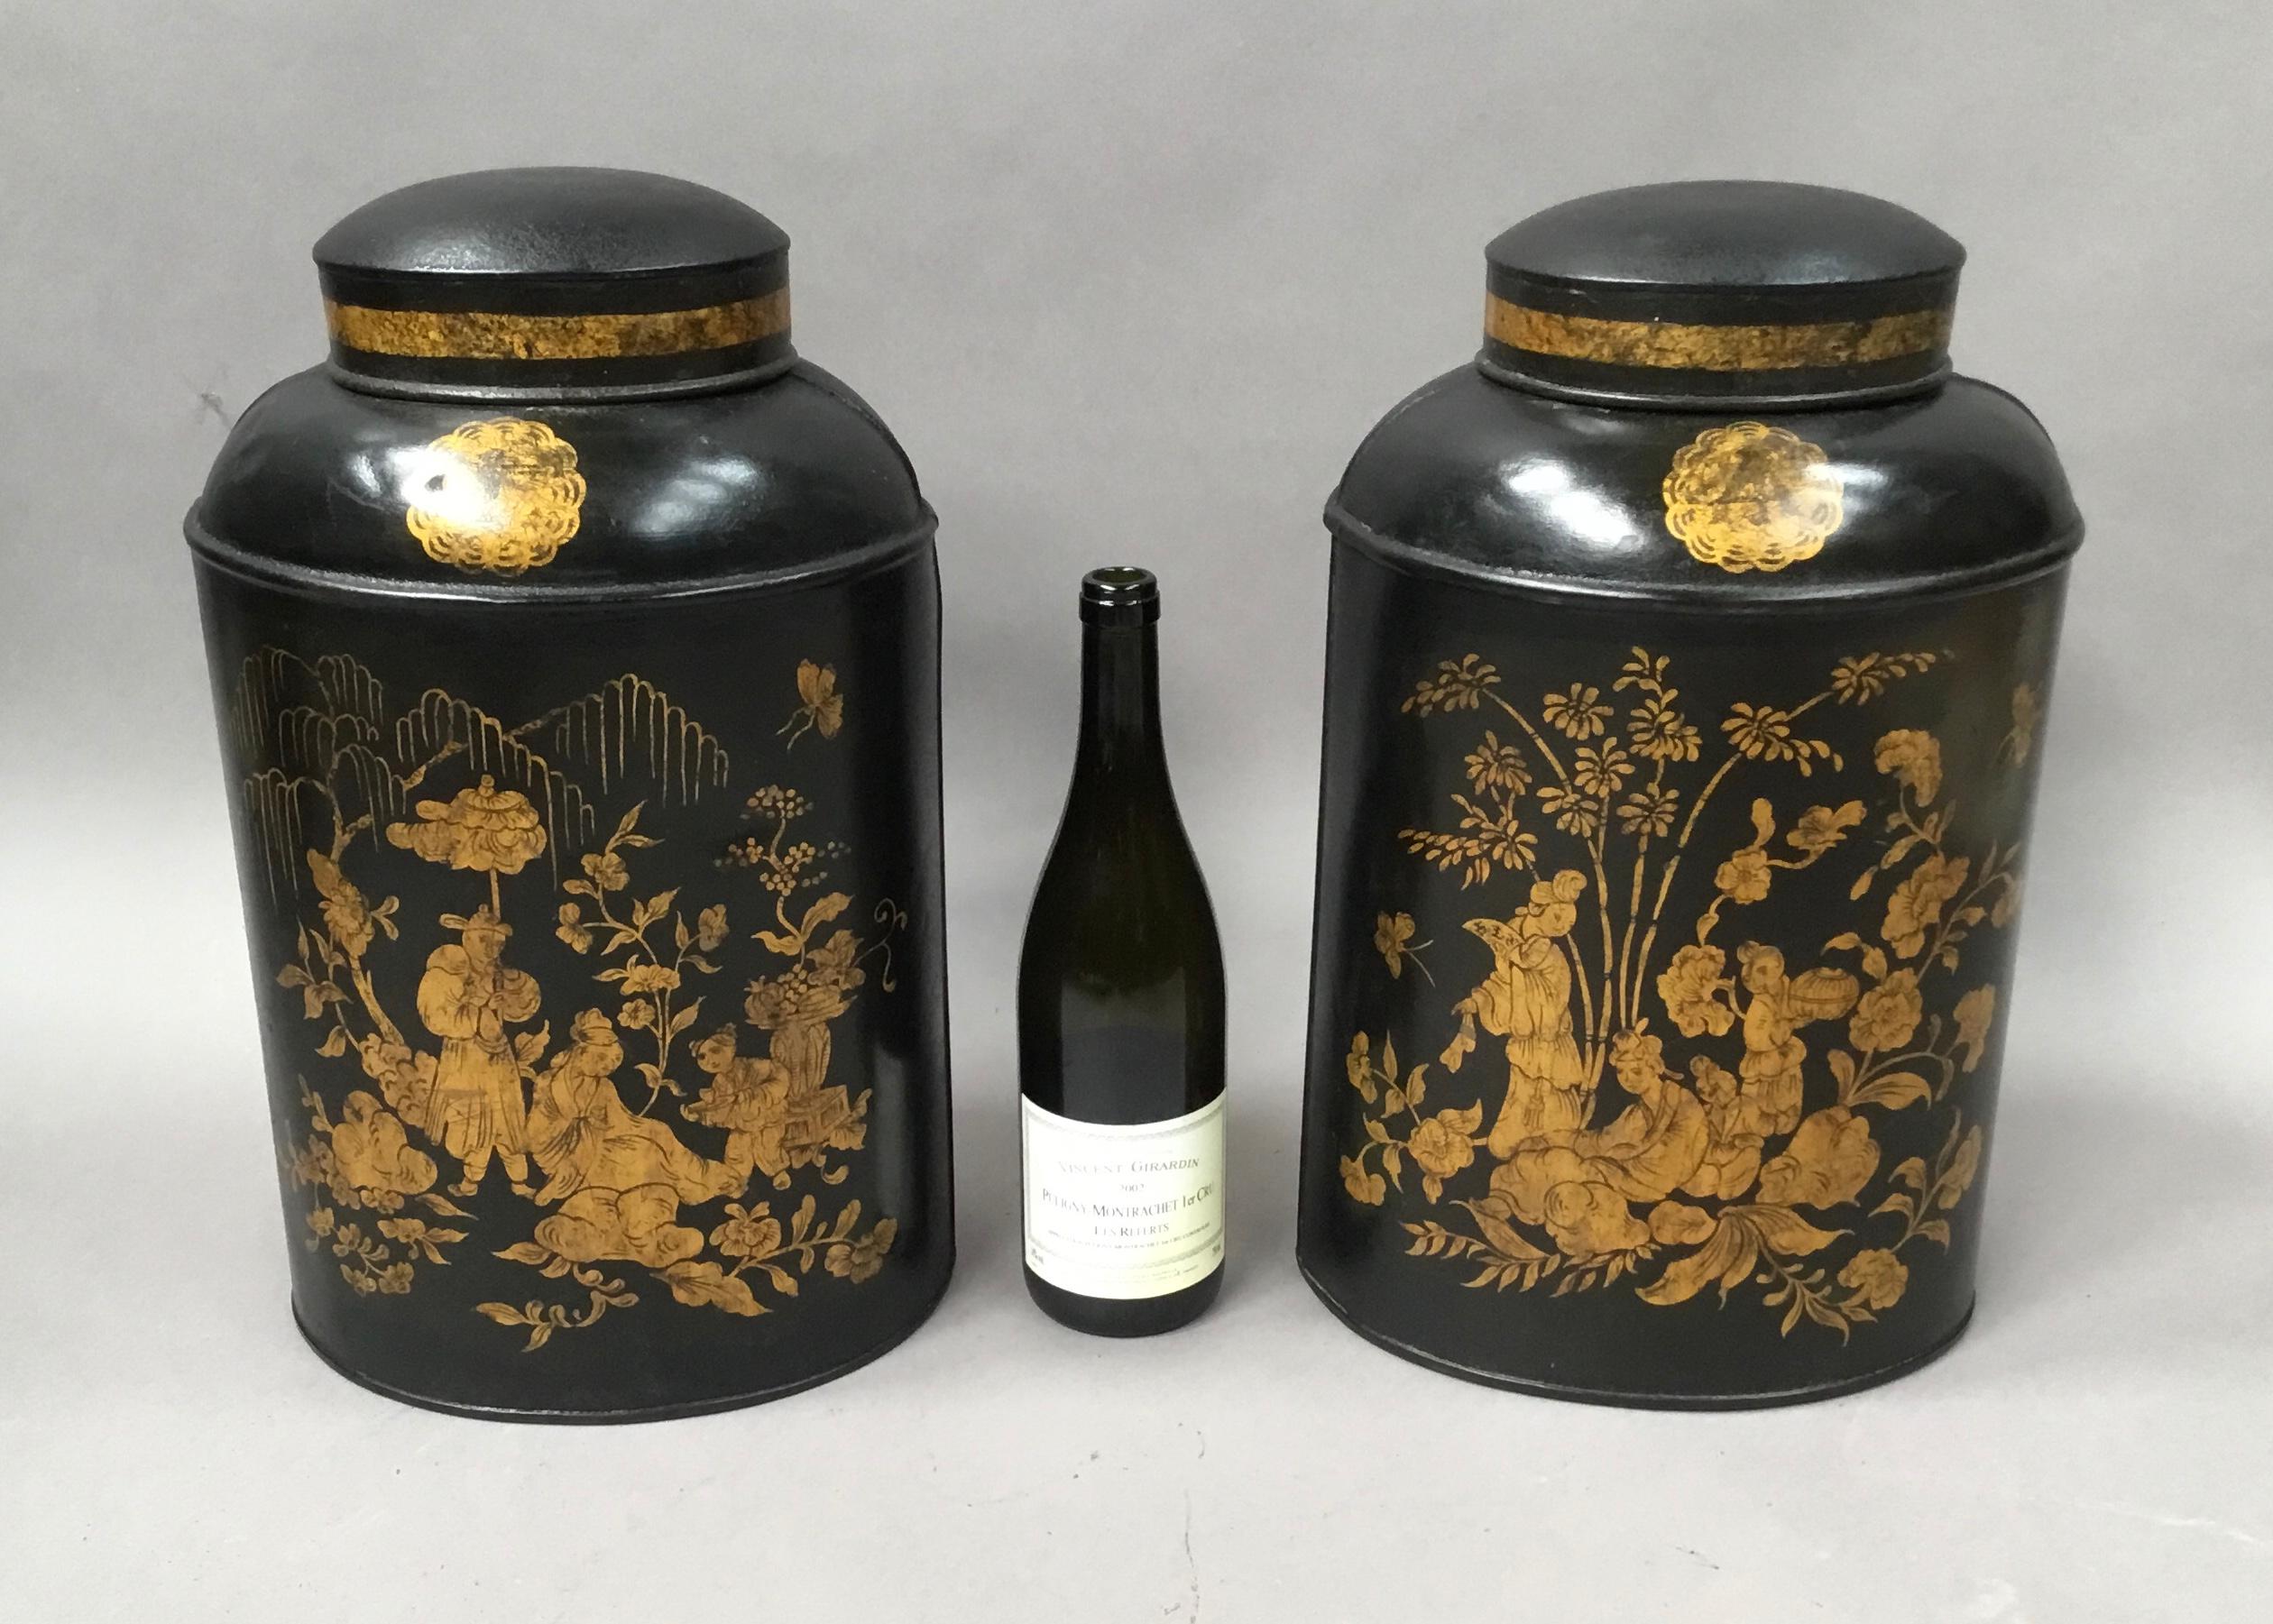 Good 19th century pair of chinoiserie lacquered tole tea canisters by John Bartlett; of unusual oval form and decorated in black and gilt. The domed tops retaining their original lids and numbered 1 and 4, the fronts depicting a different Chinese